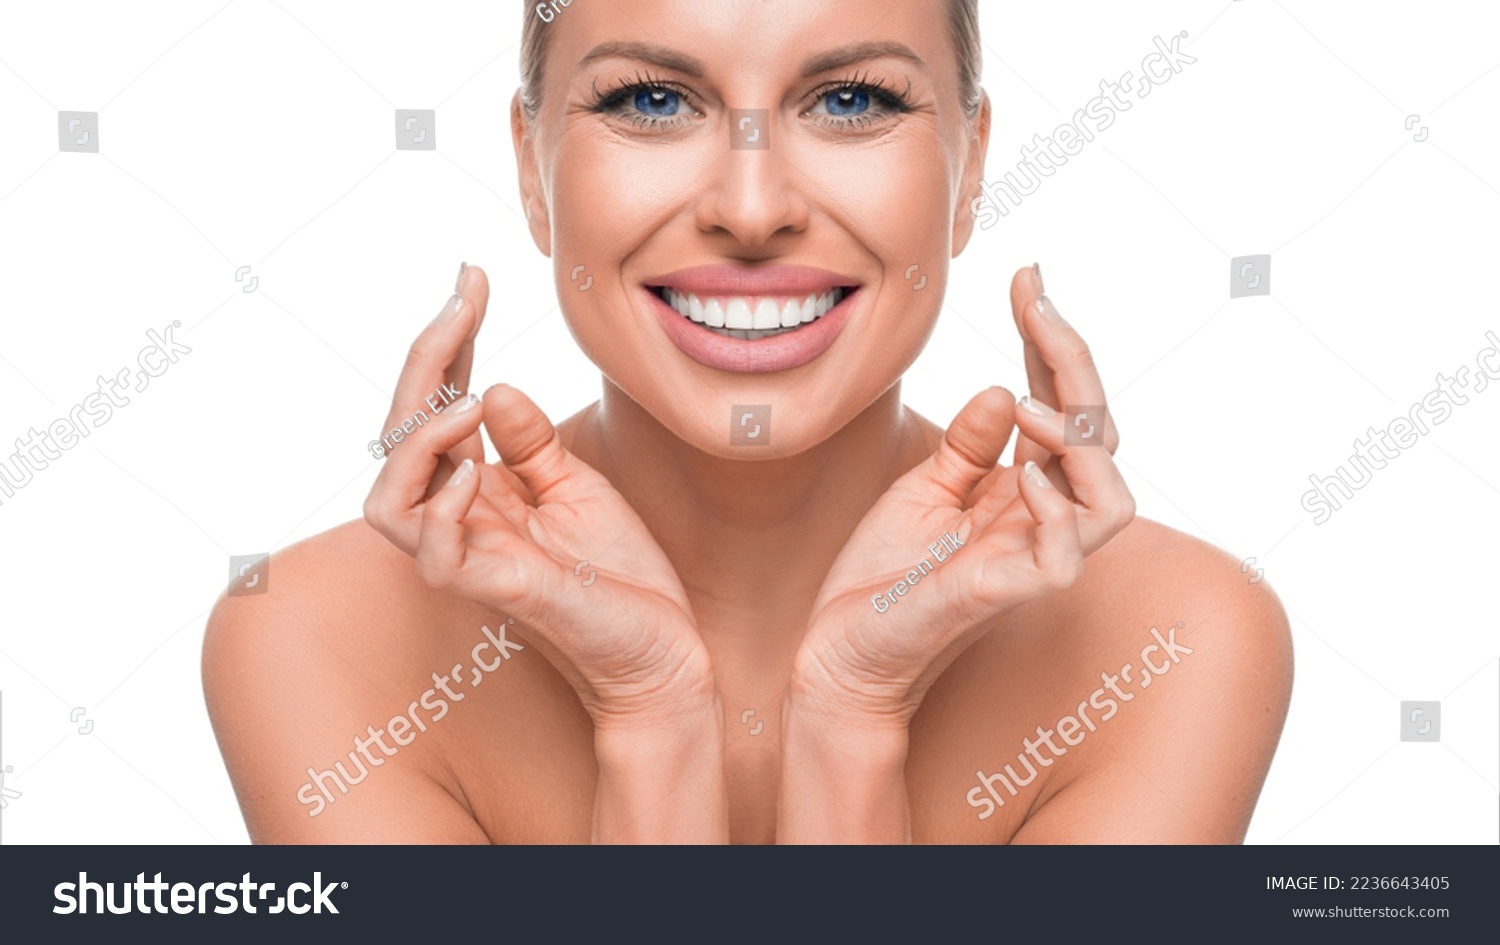 Happy smiling woman touching her face. Anti-age skin cate and tooth whitening concept. #2236643405